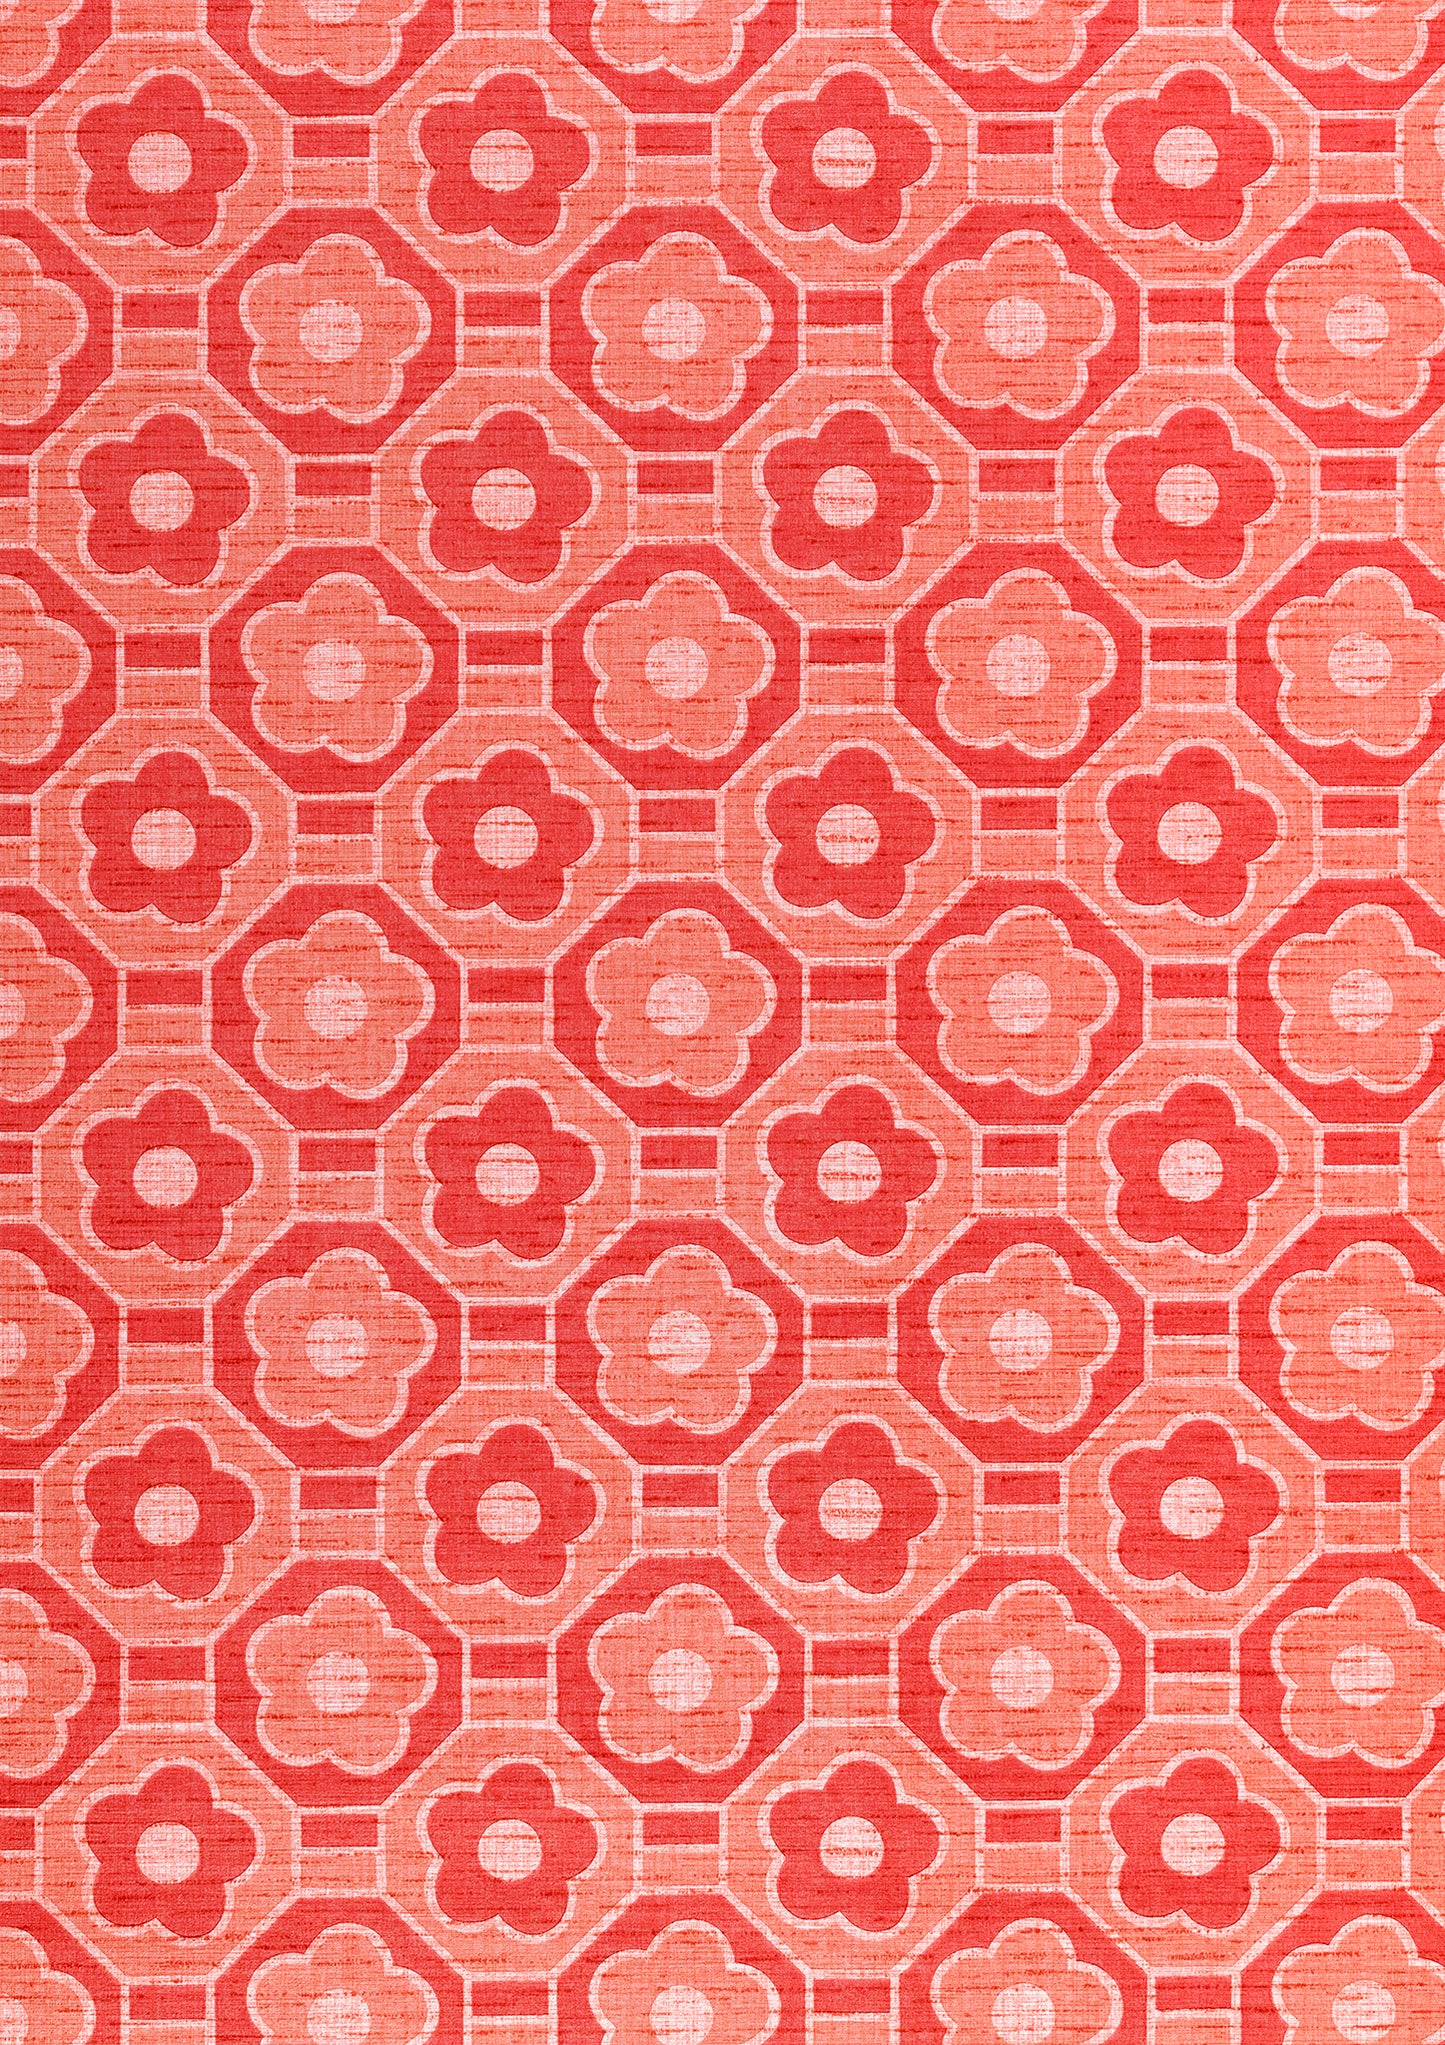 Red and Peach A1 Photography Backdrop - Floral Vintage Wallpaper